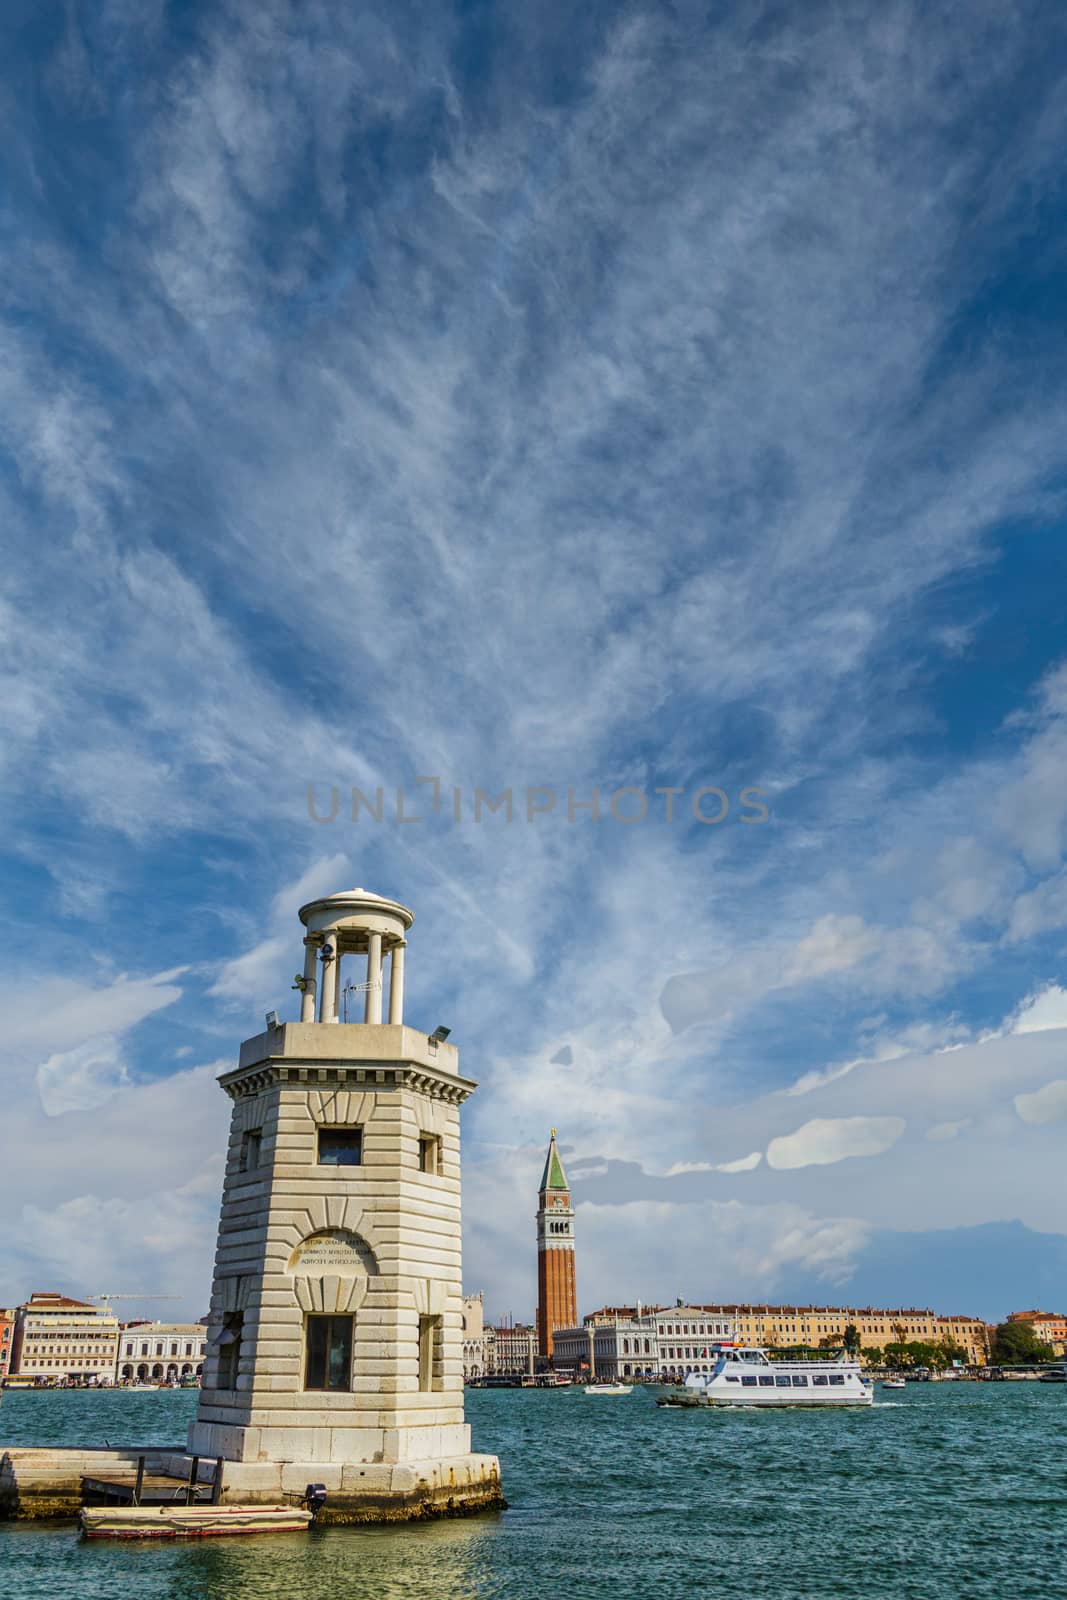 Lighthouse of San Giorgio and St Marks in Background by dbvirago